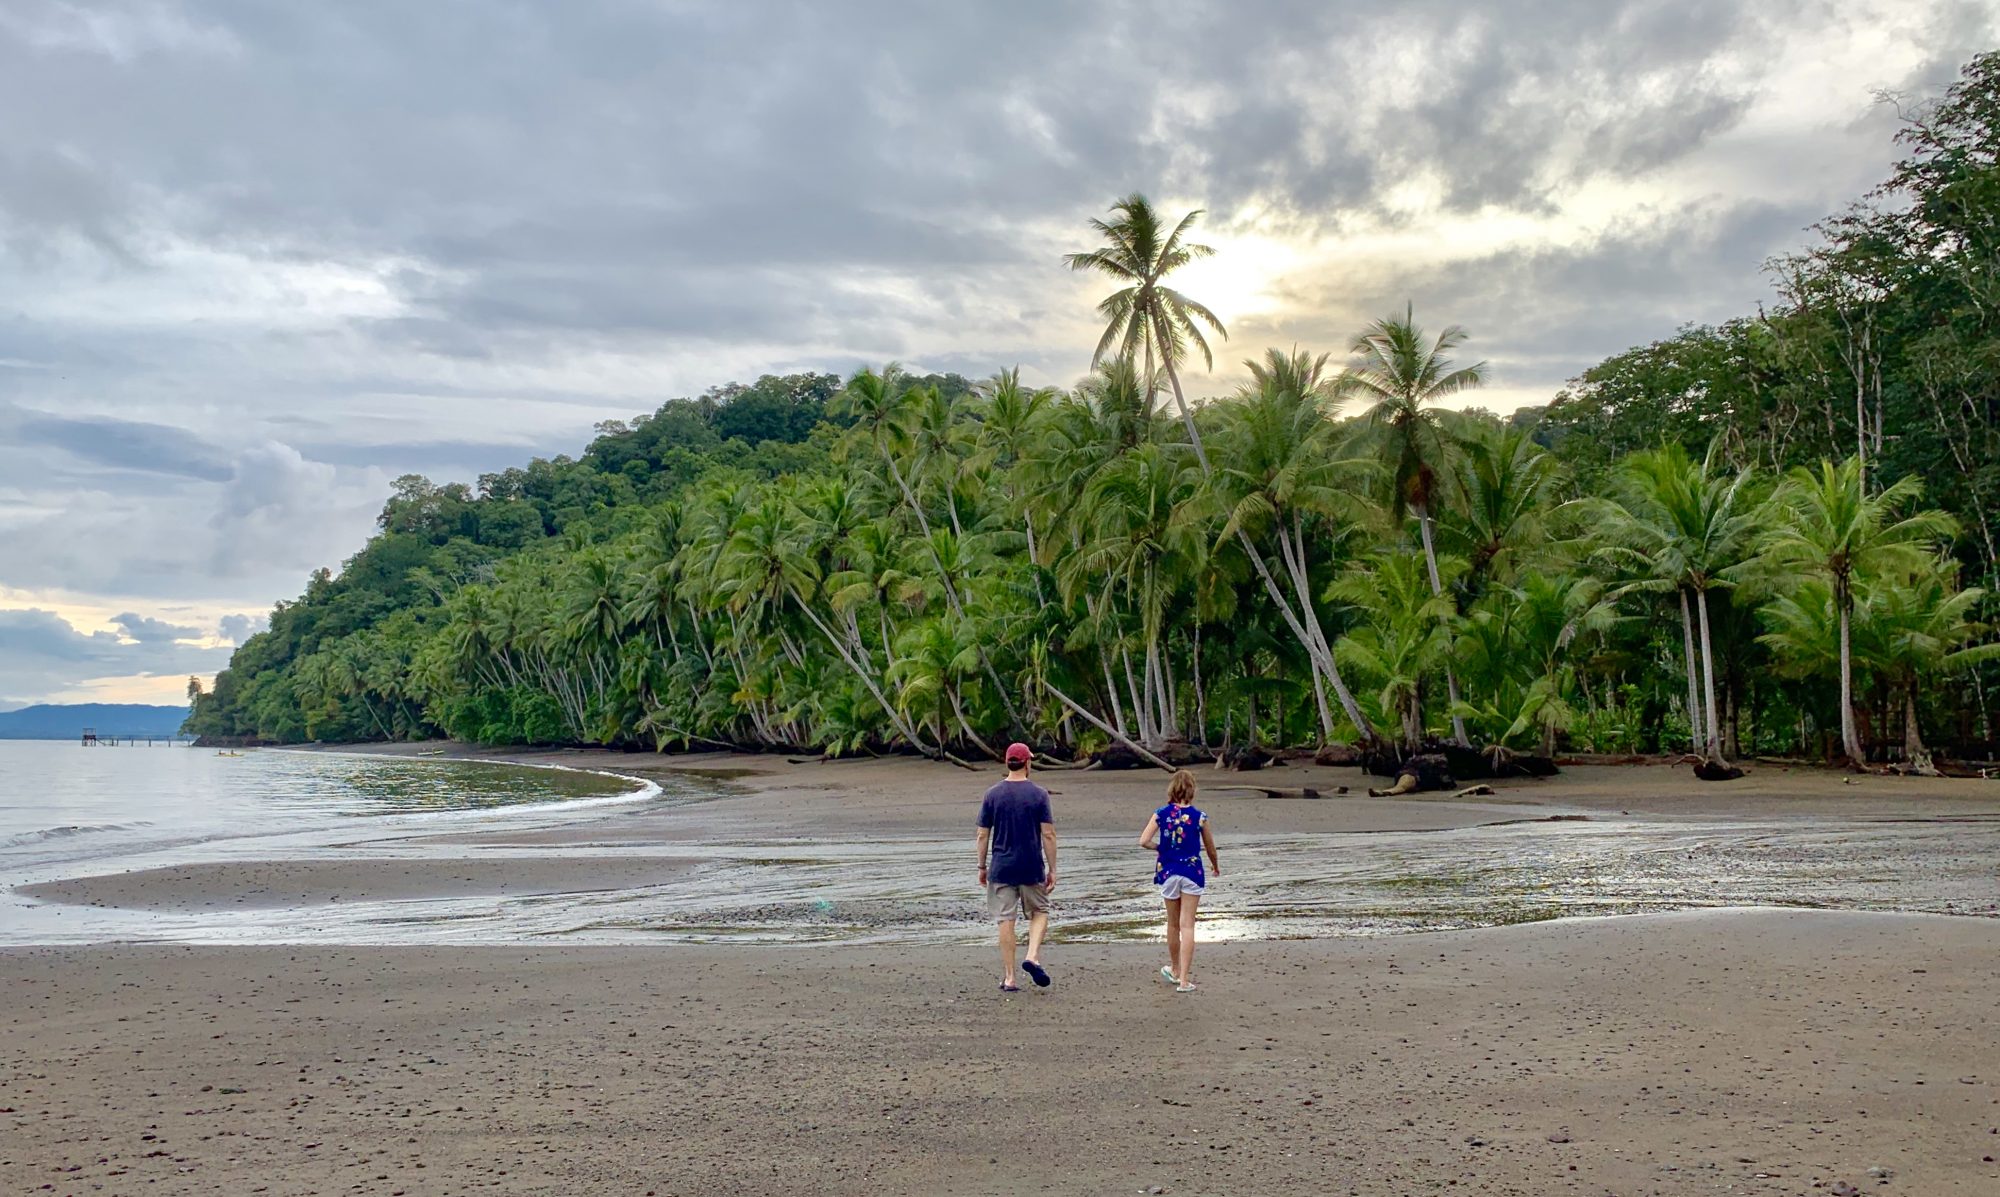 two travelers walking at the beach with palm trees